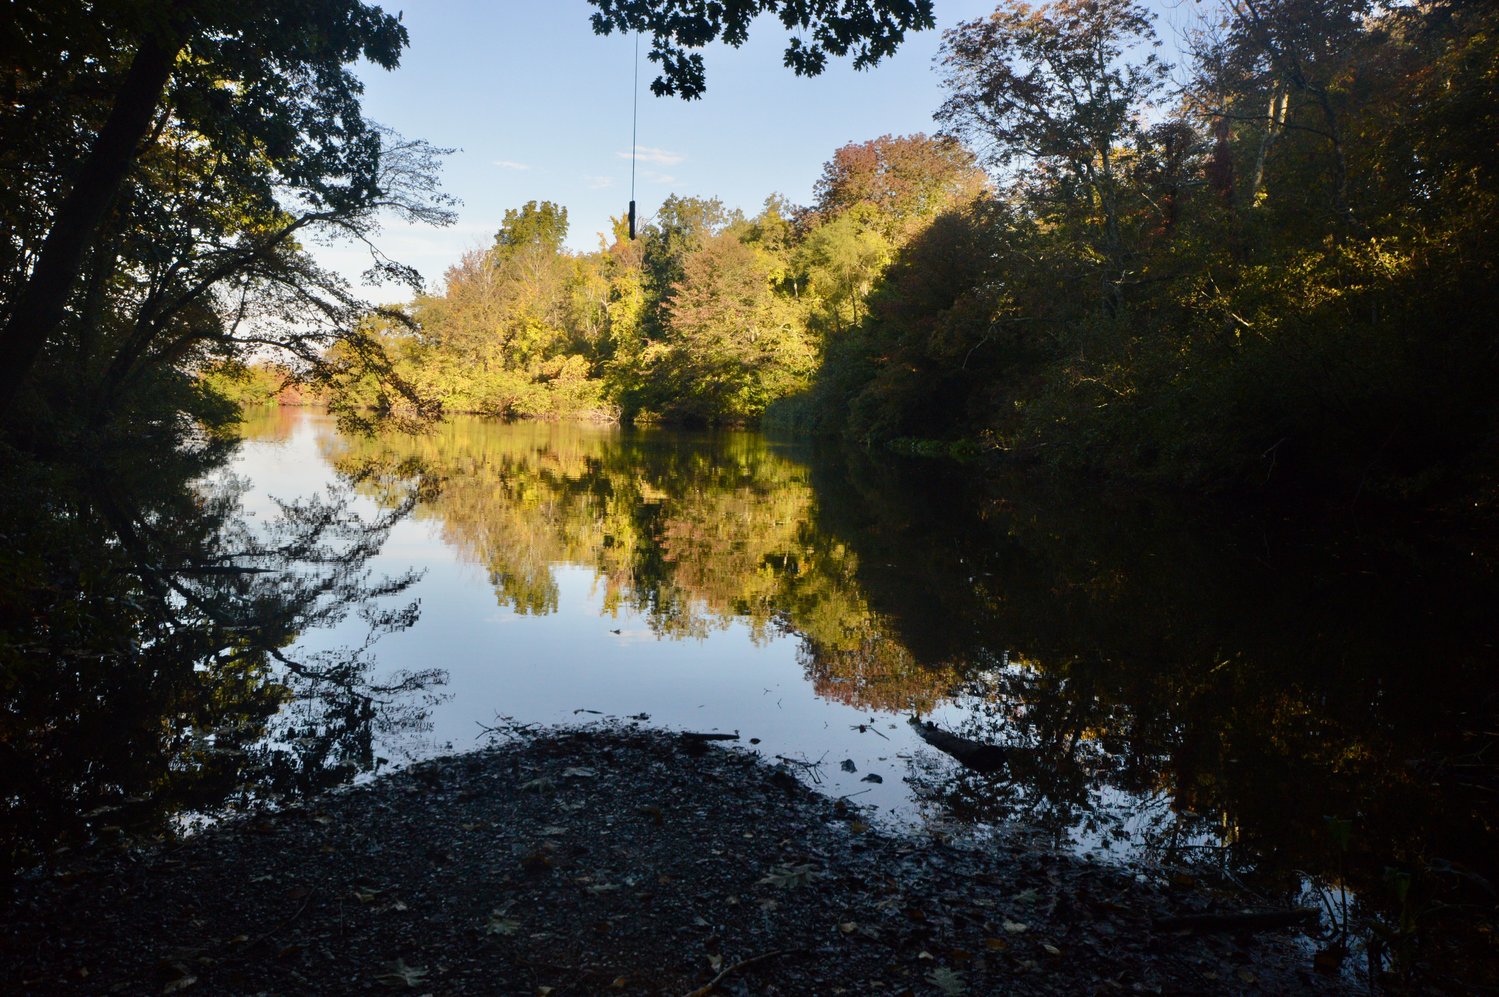 Lower Pond at Melville Park is a favorite spot for fishing — and for taking in nature’s beauty.